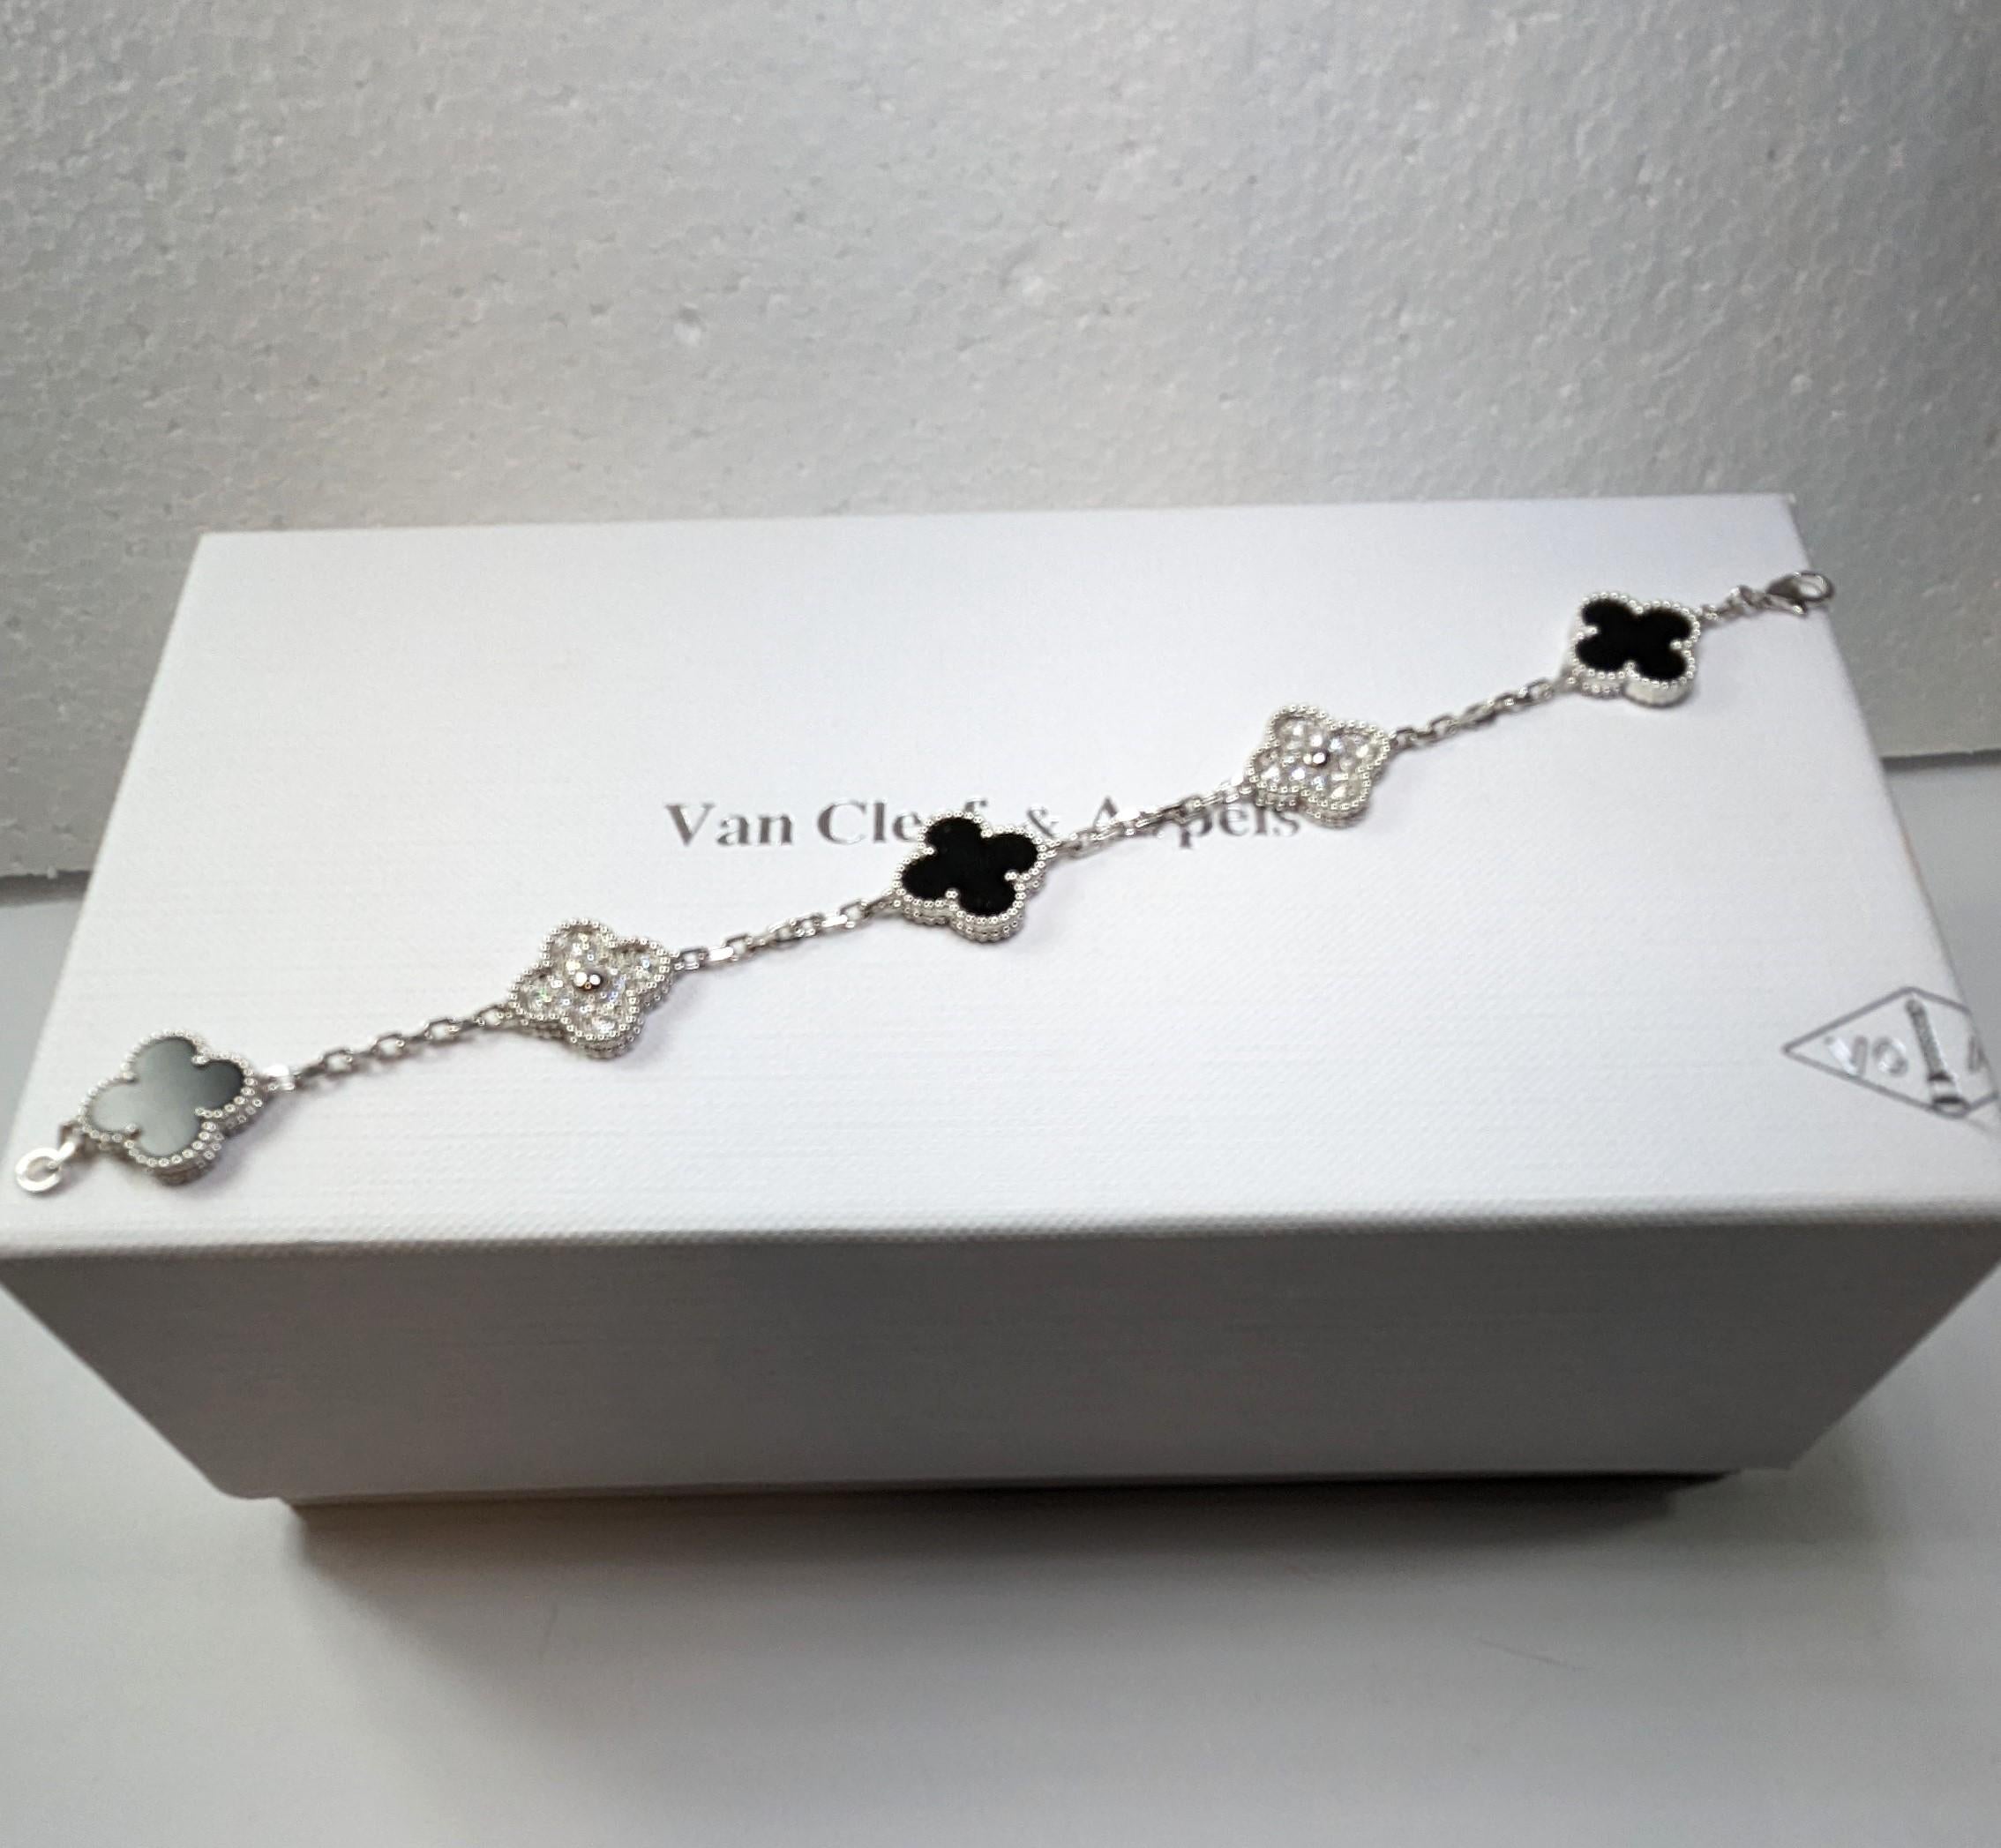 Contemporary Van Cleef & Arpels Alhambra Bracelet in Diamonds and Onyx in 18k White Gold